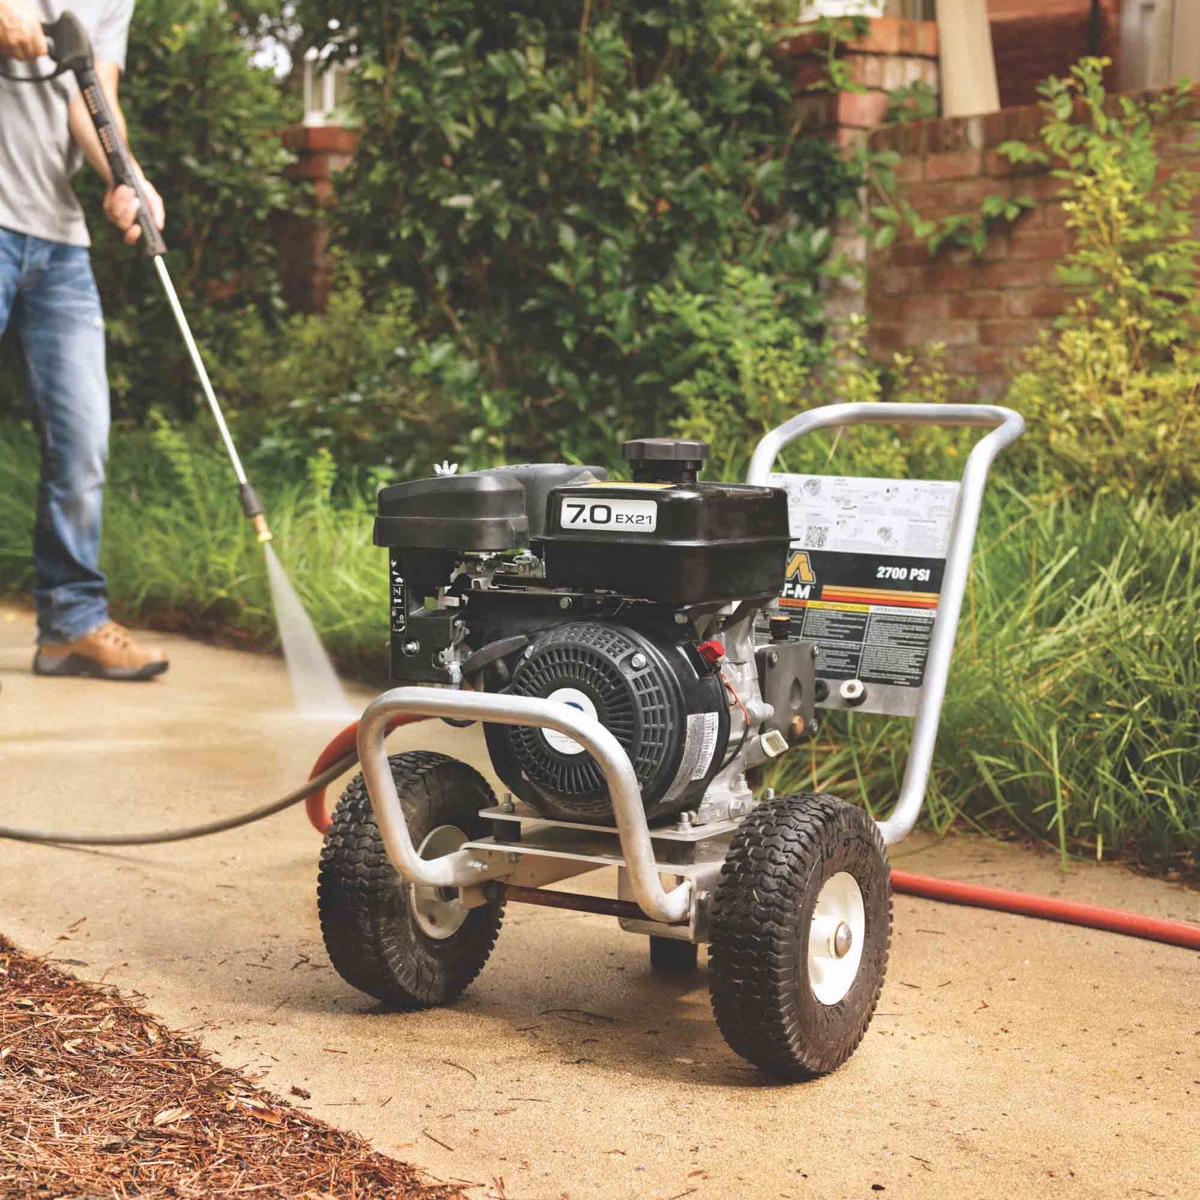 How Much To Rent A Pressure Washer At Home Depot